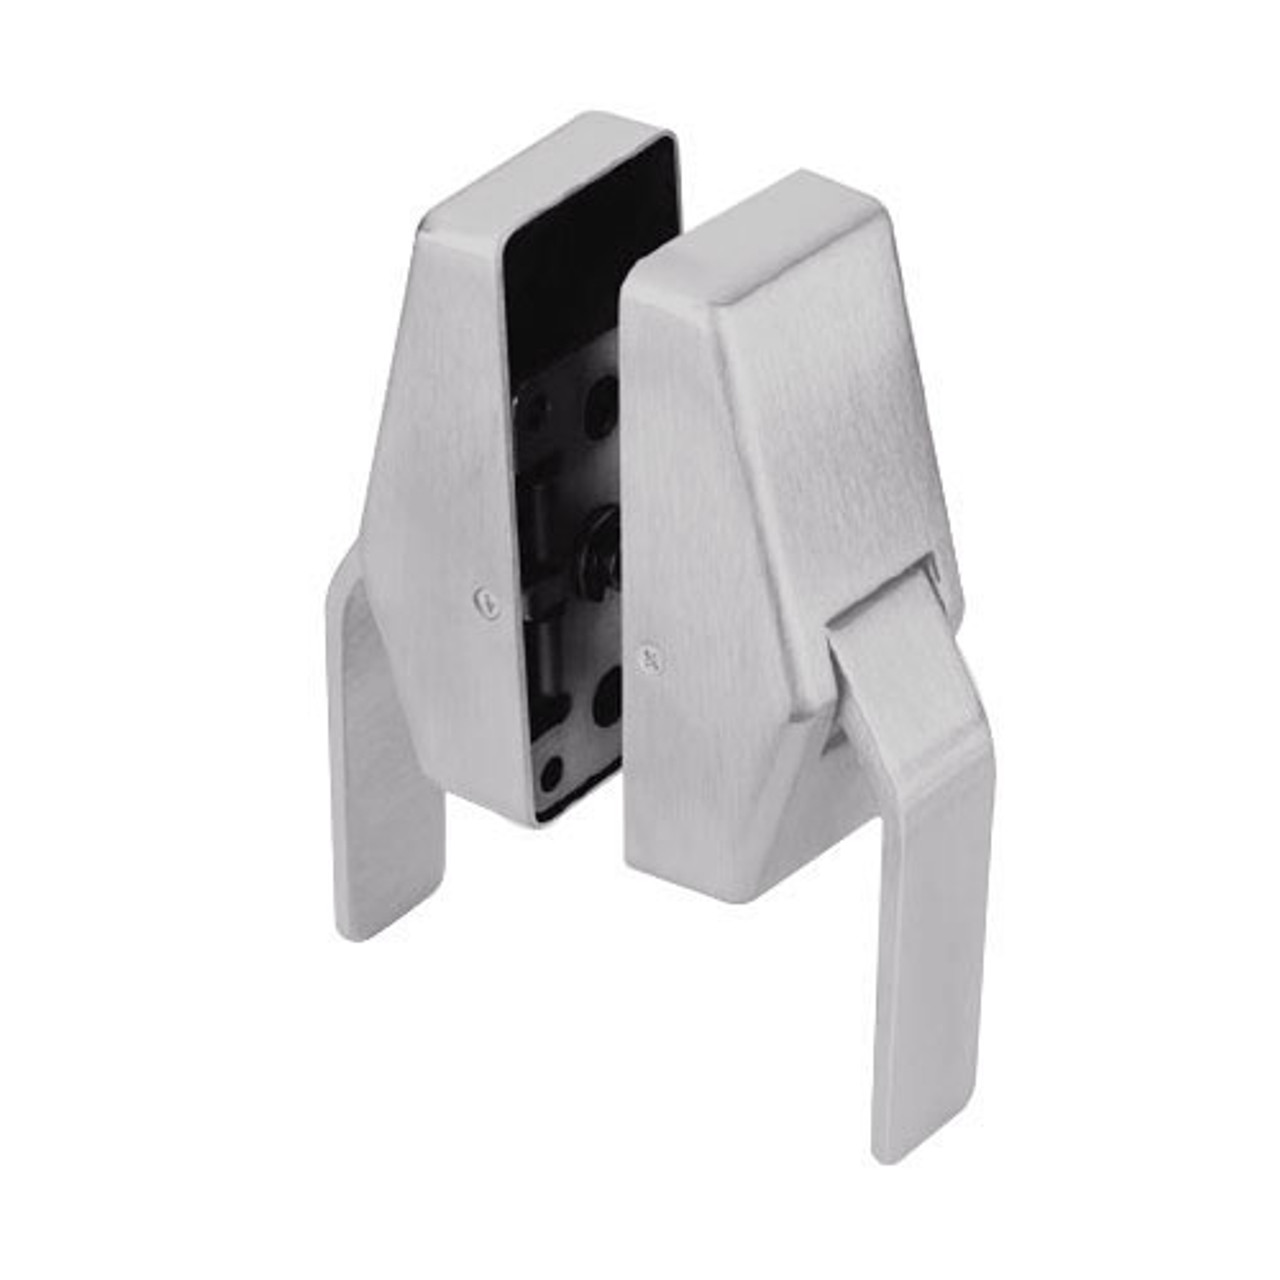 HL6-5-626-SOC Glynn Johnson HL6 Series Standard Function Push and Pull latch with Pin-in-Socket Security Screws in Satin Chrome Finish